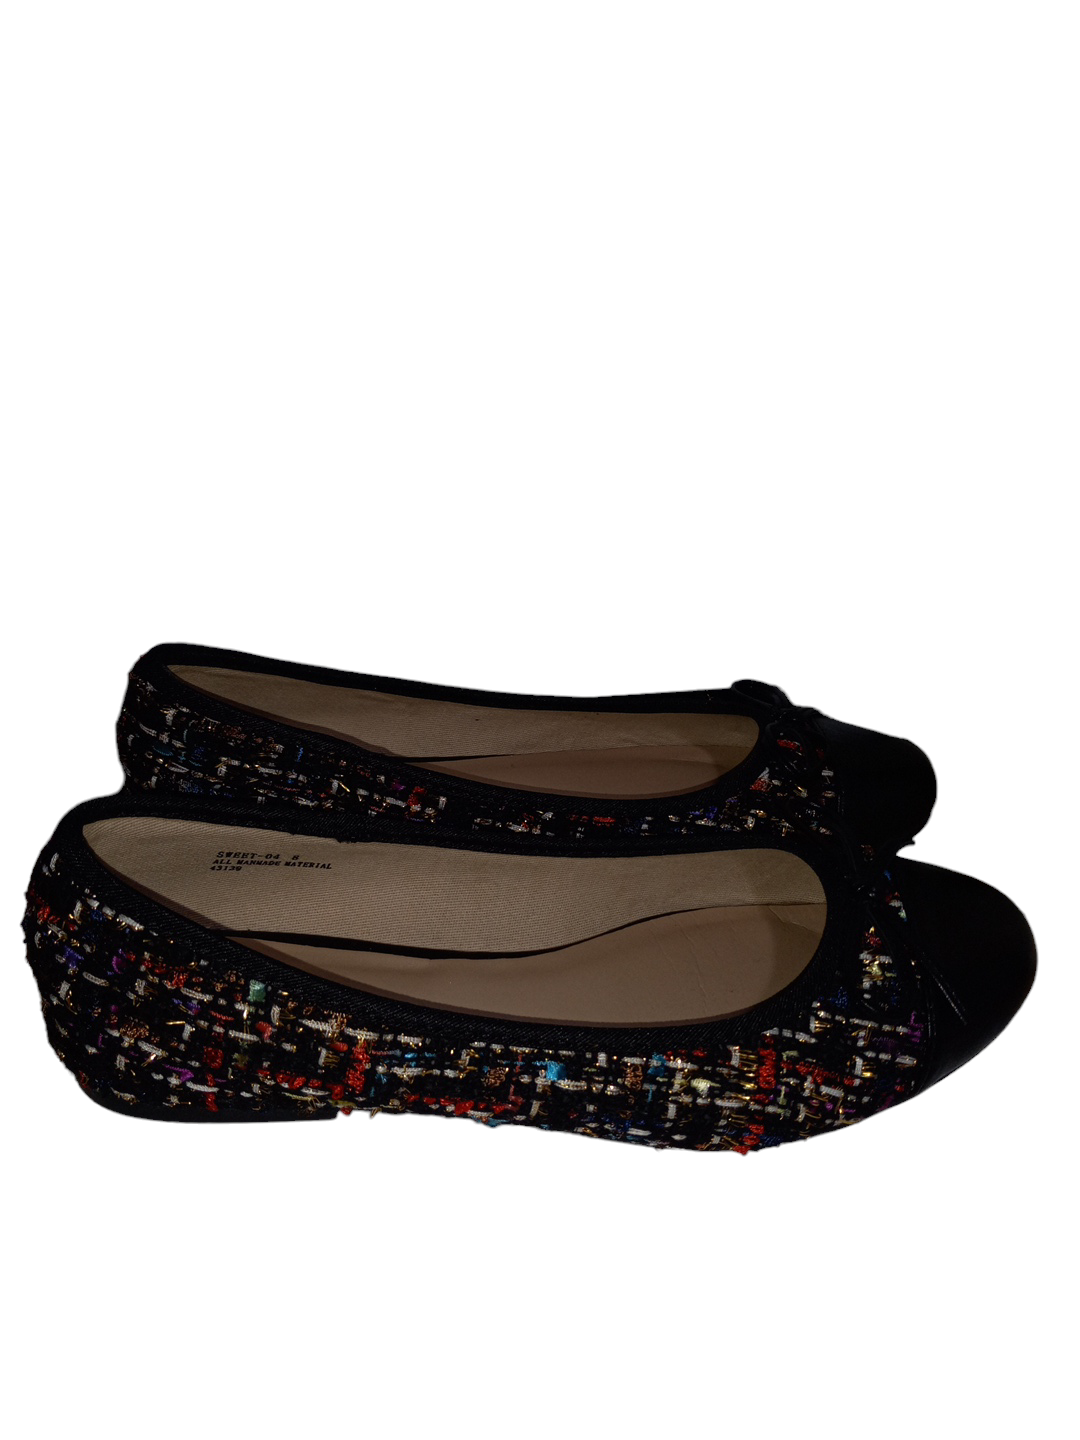 Multi-colored Shoes Flats Bamboo, Size 8